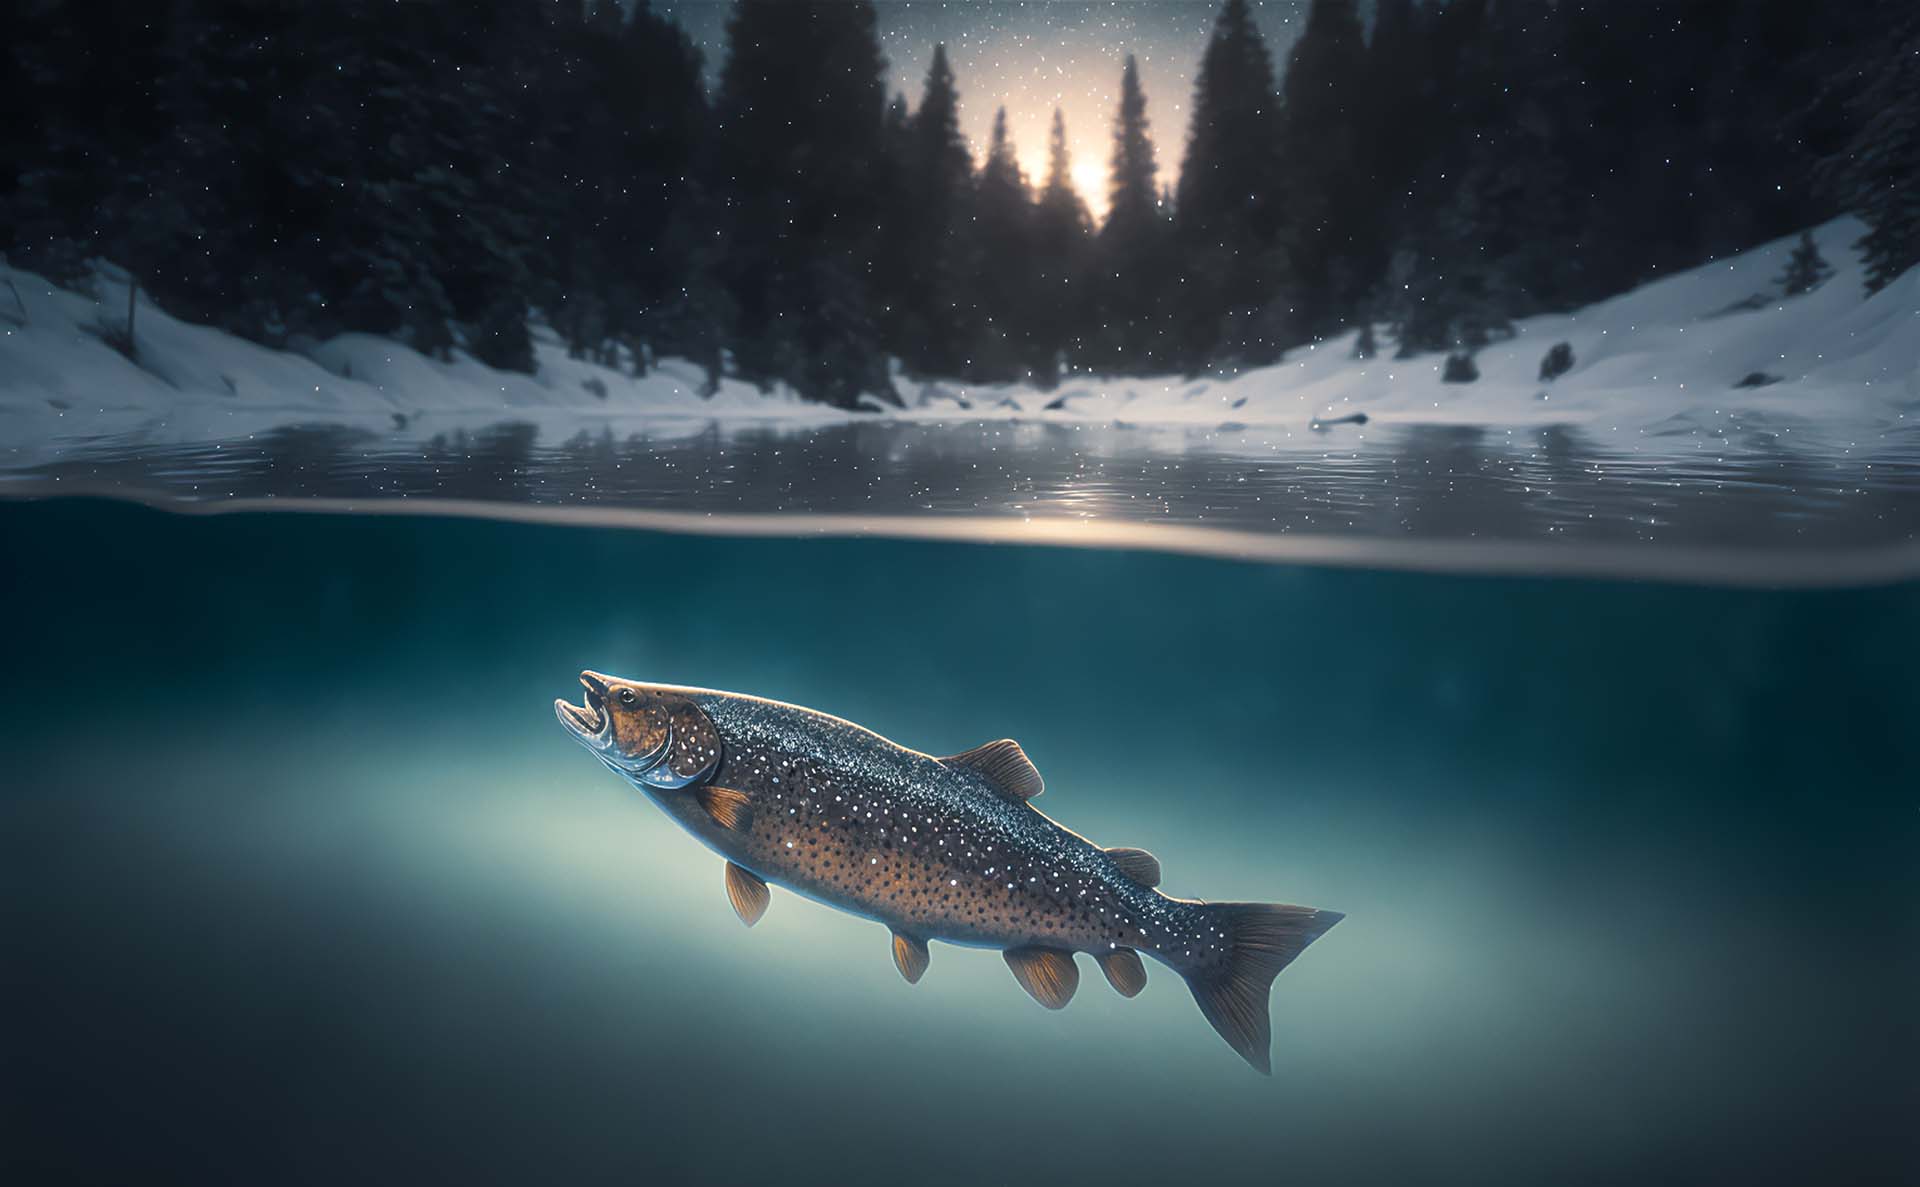 Trout underwater in the starry night